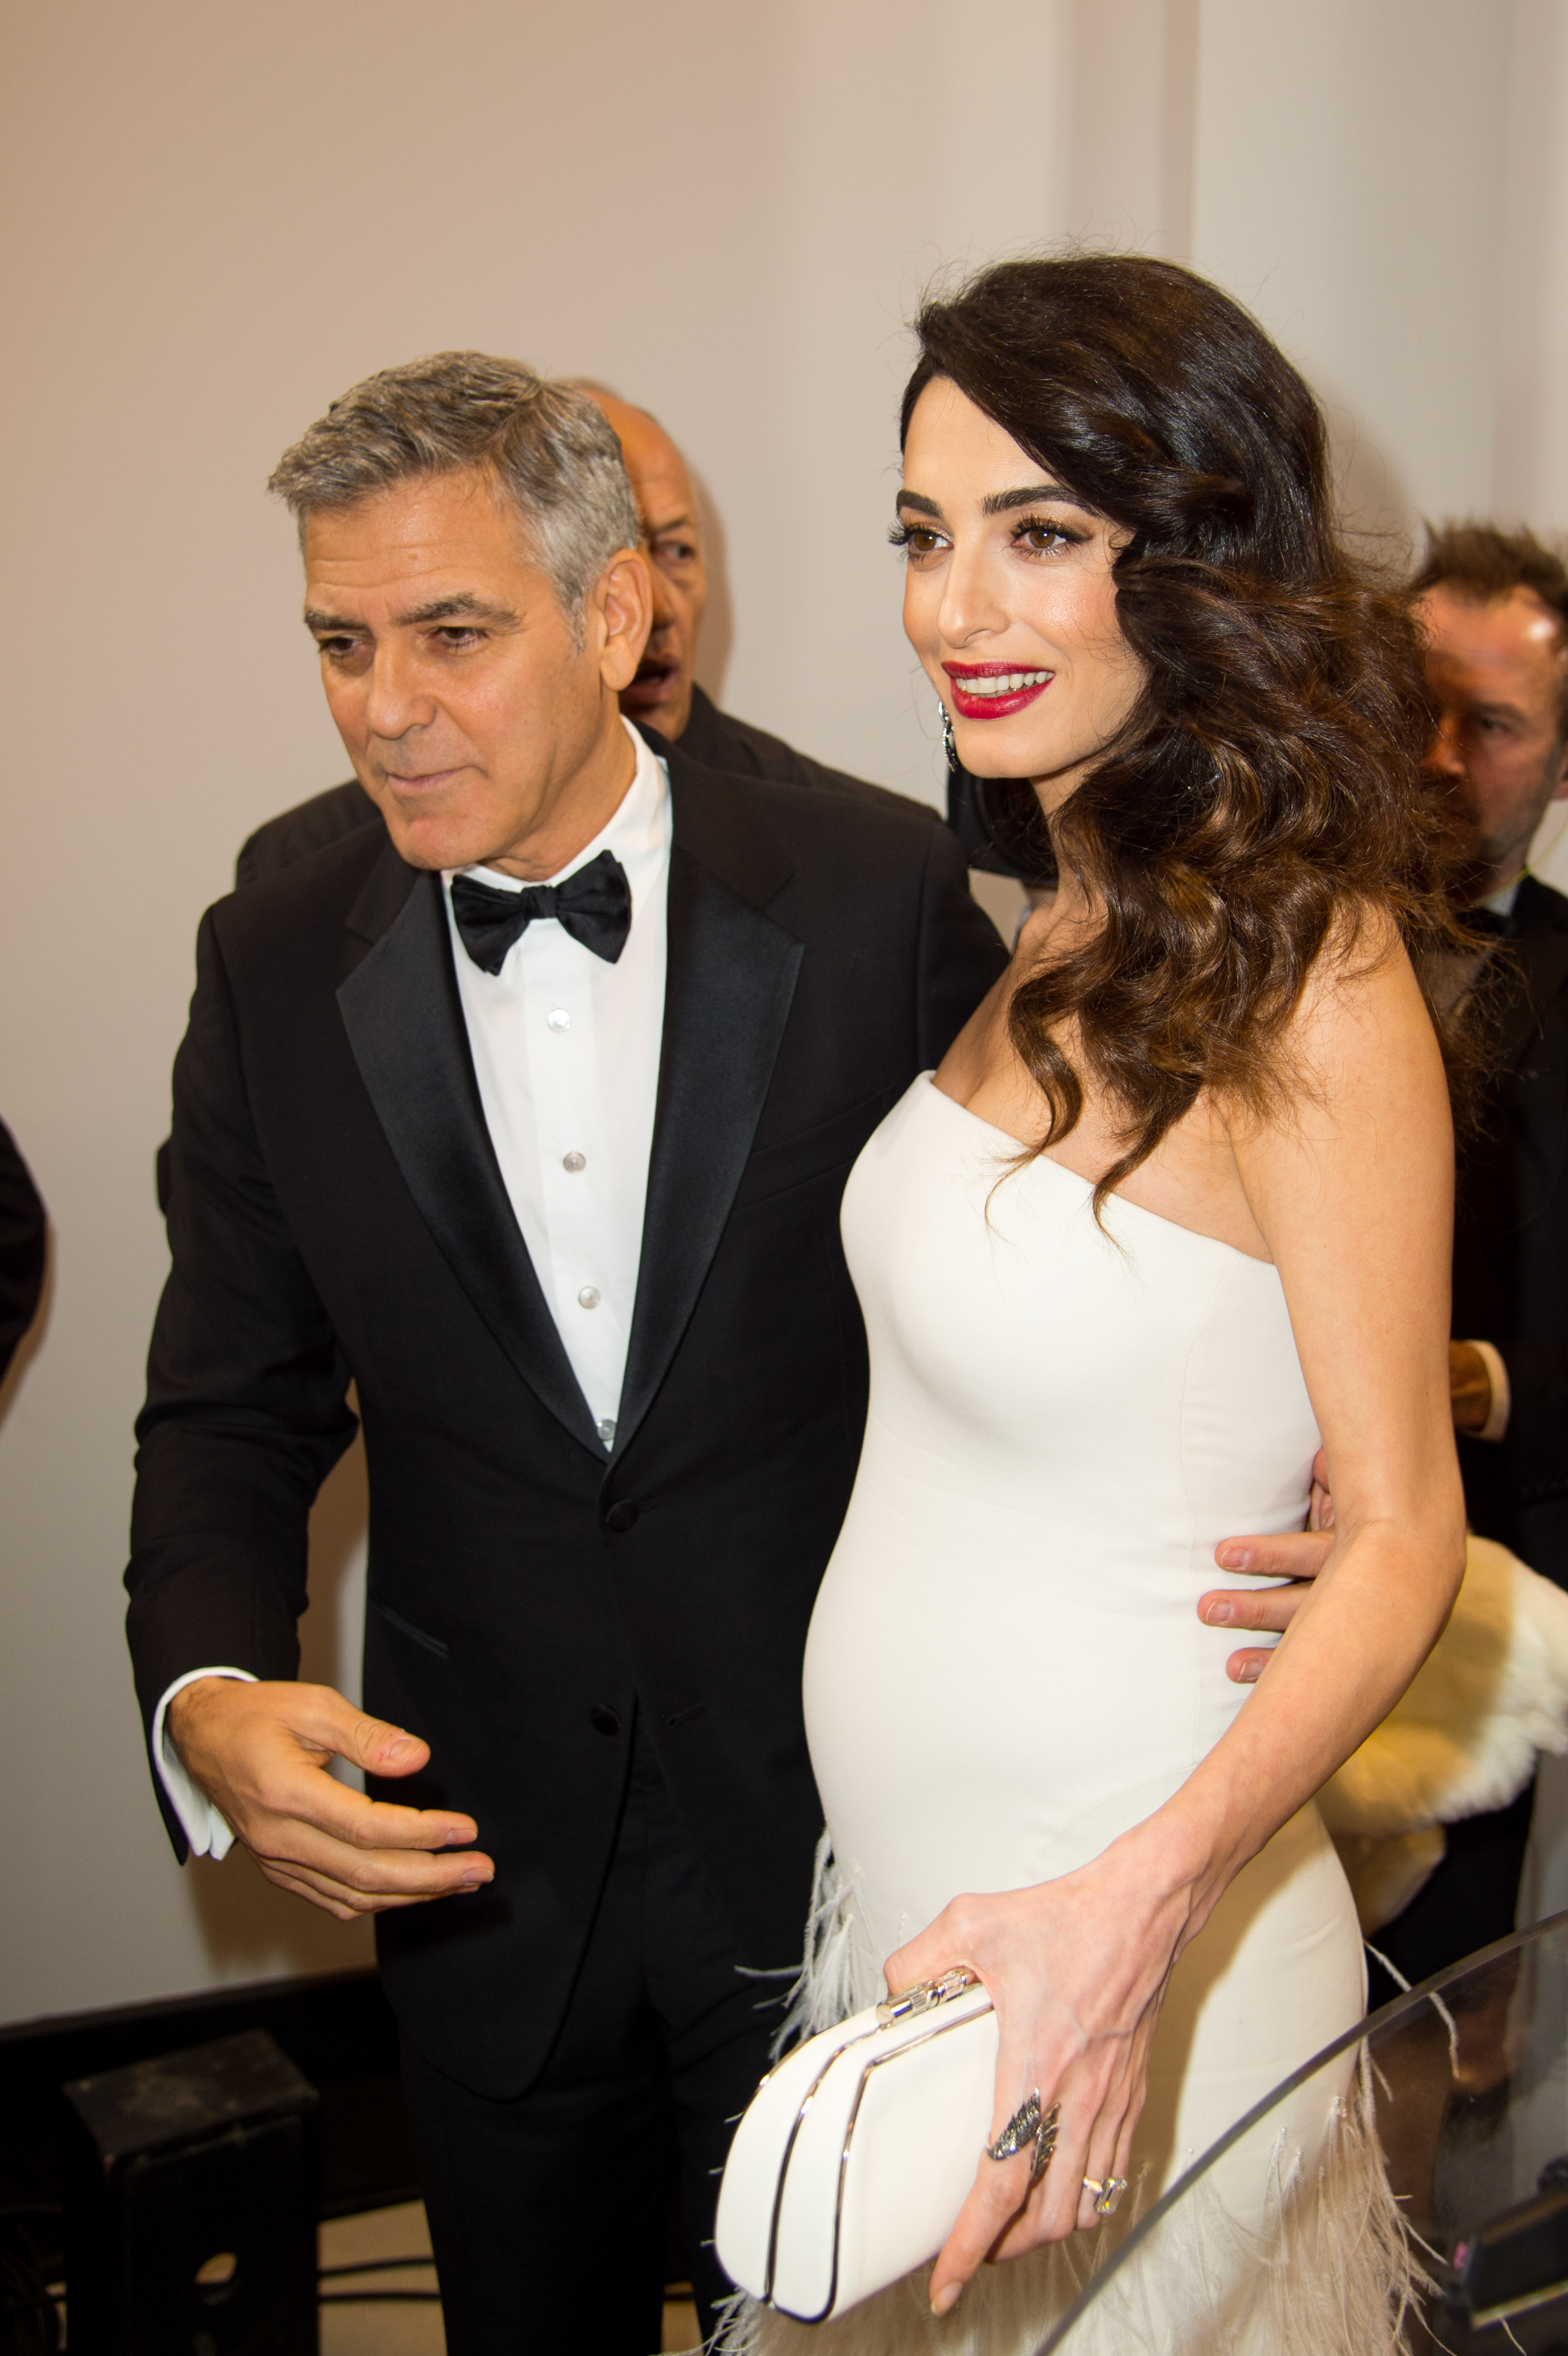 George Clooney and Amal Clooney arrive at the ceremony of the Cesar Film Awards 2017 at Salle Pleyel, on February 24, 2017, in Paris, France. | Source: Getty Images